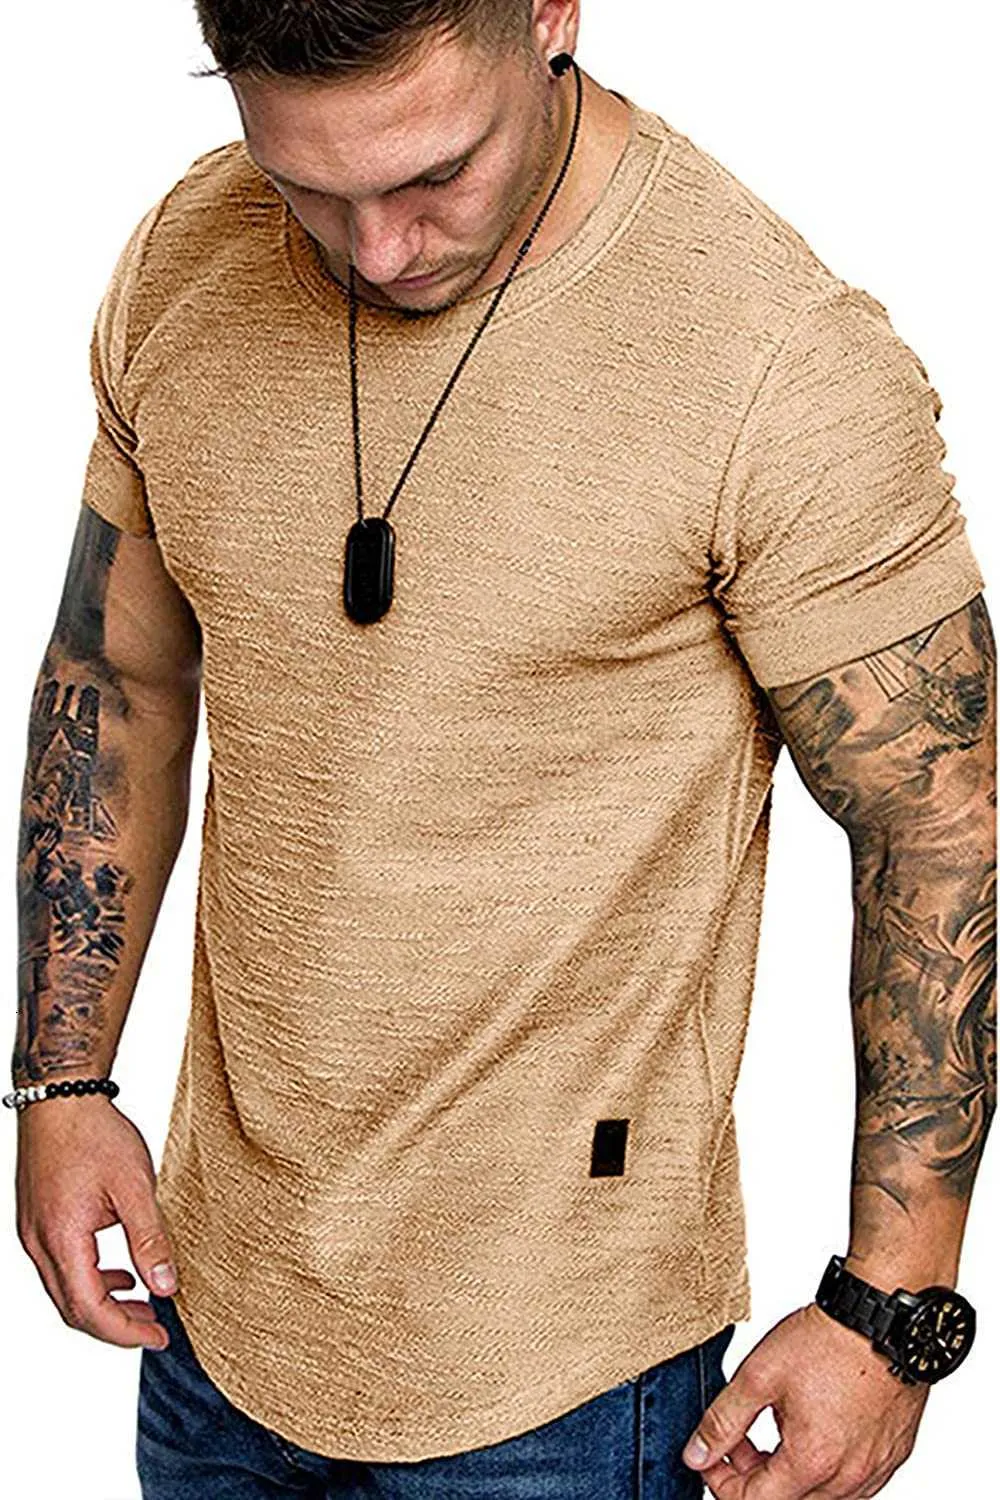 T-shirt Summer Fashion Cotton Shirt Muscle Mens Gym Workout Athletic Tee Top